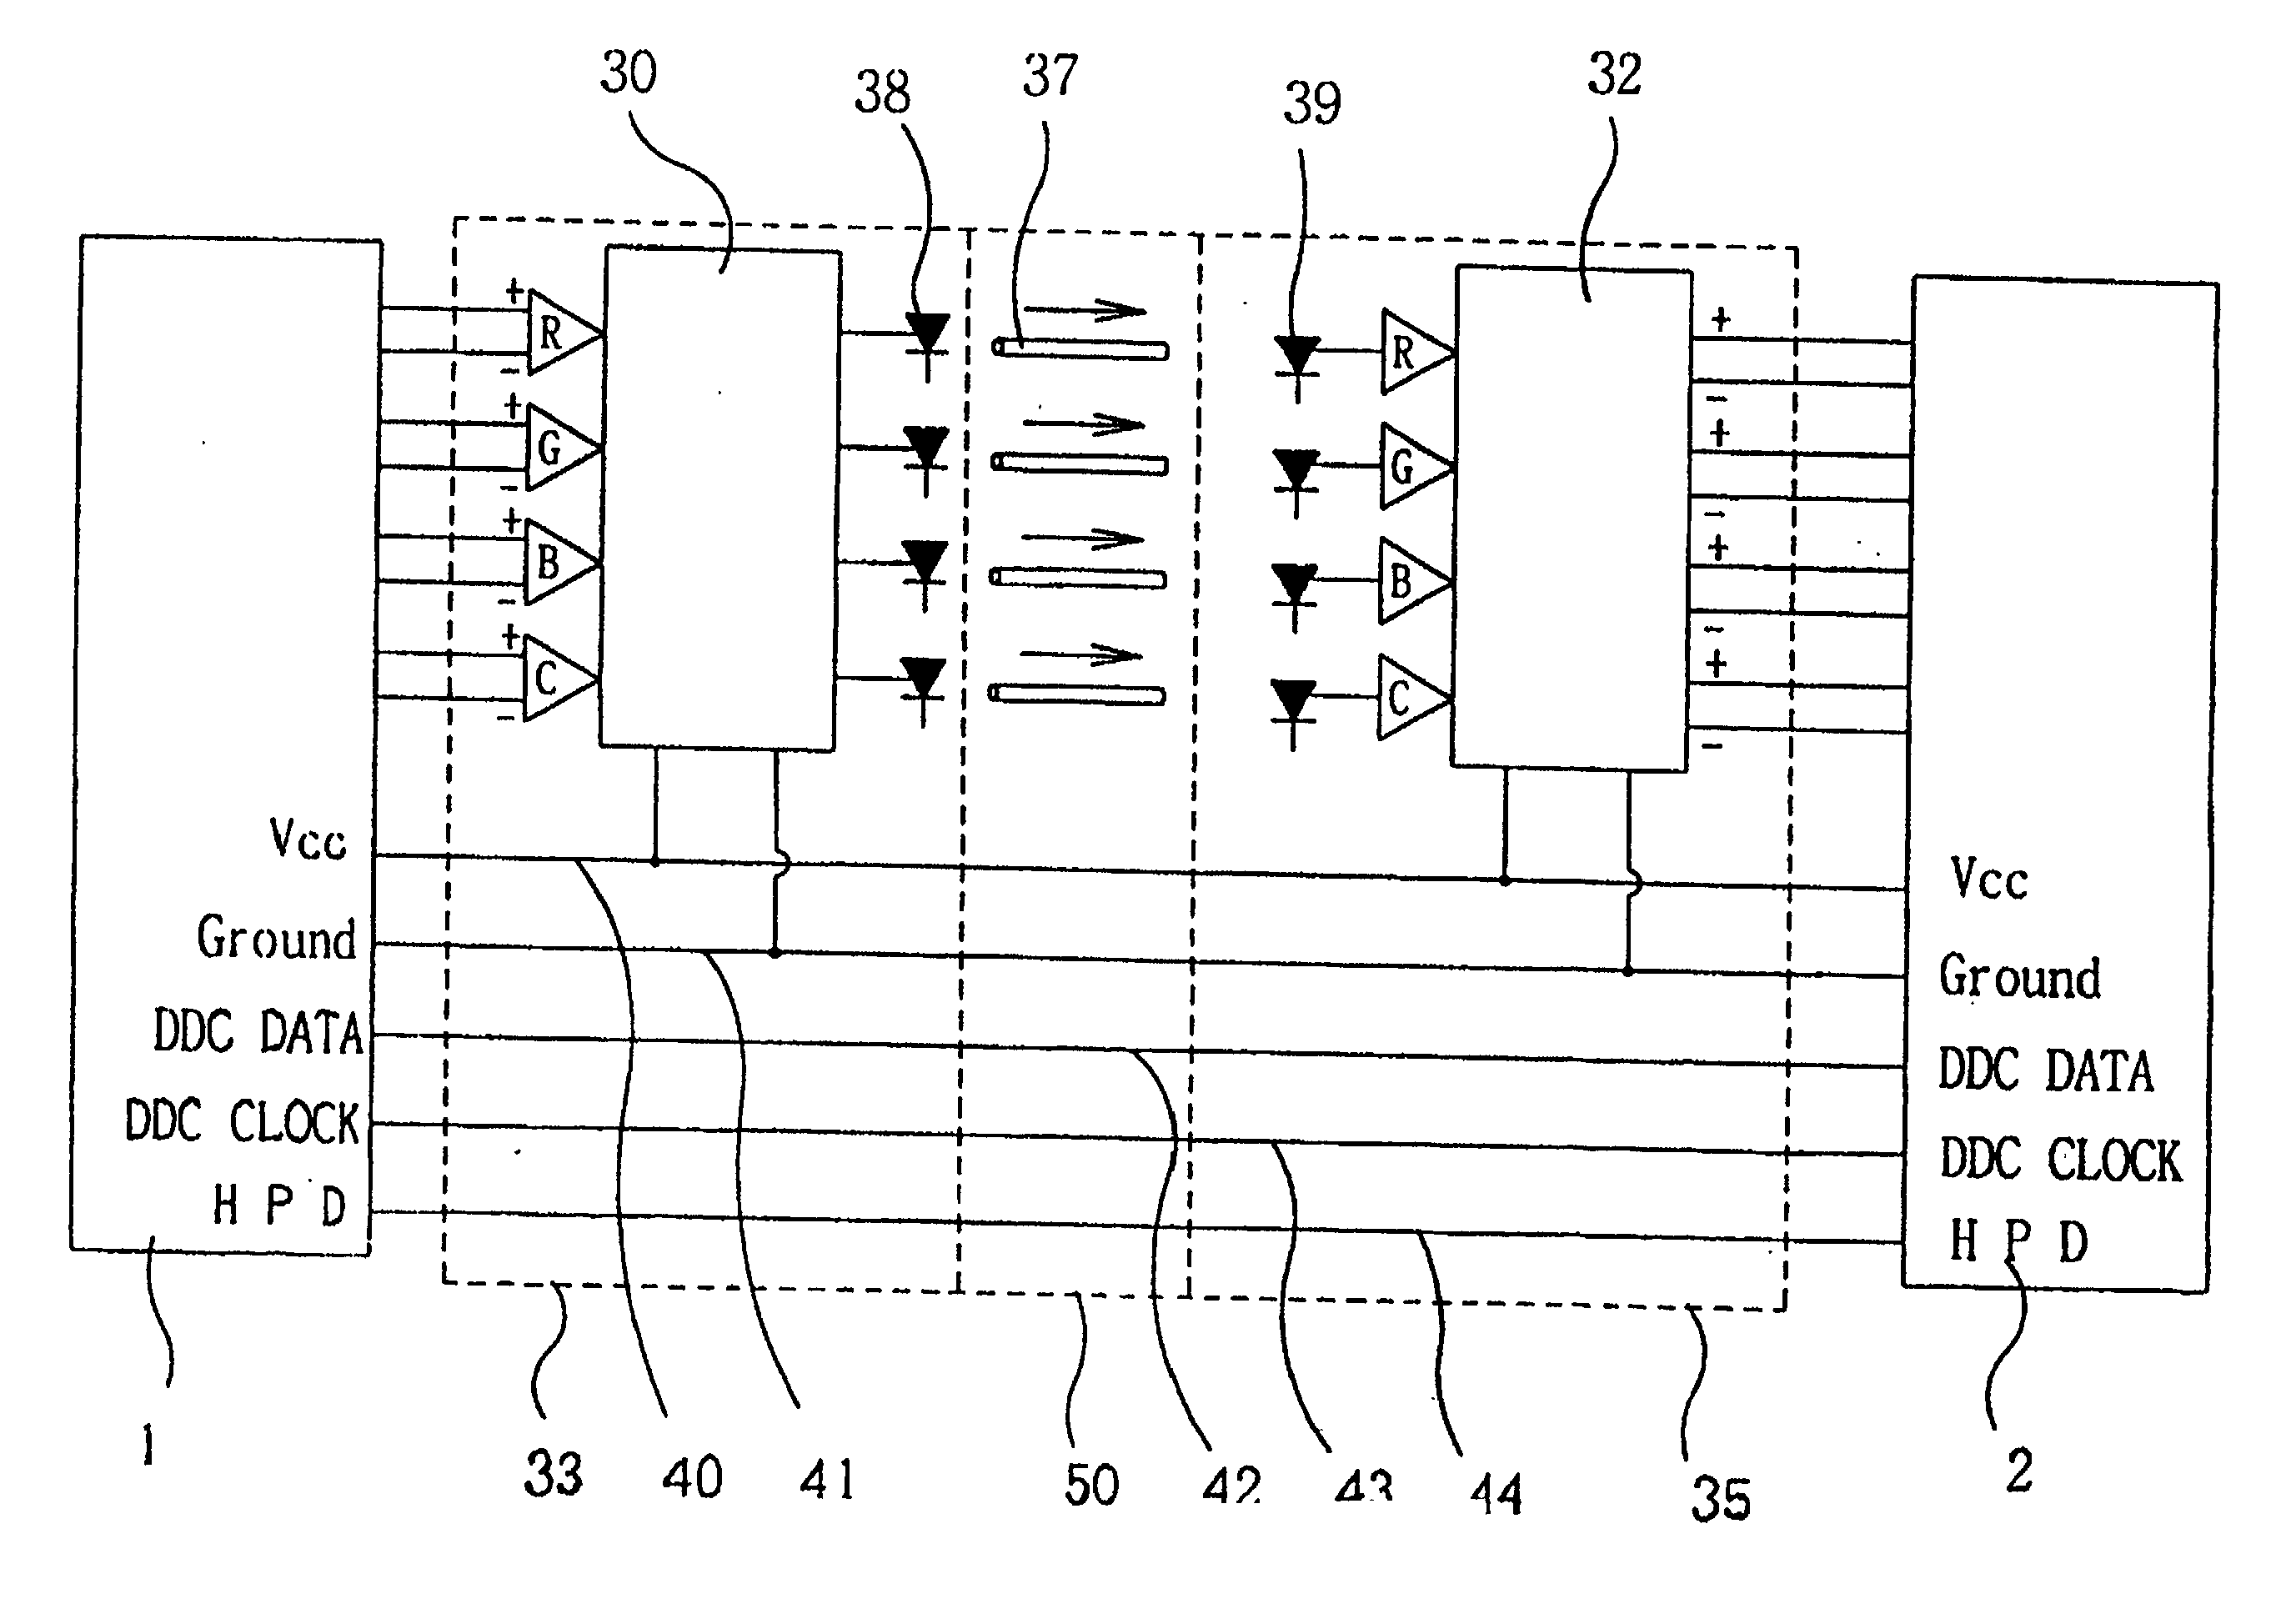 Digital video signal interface module for transferring signals to a long distance